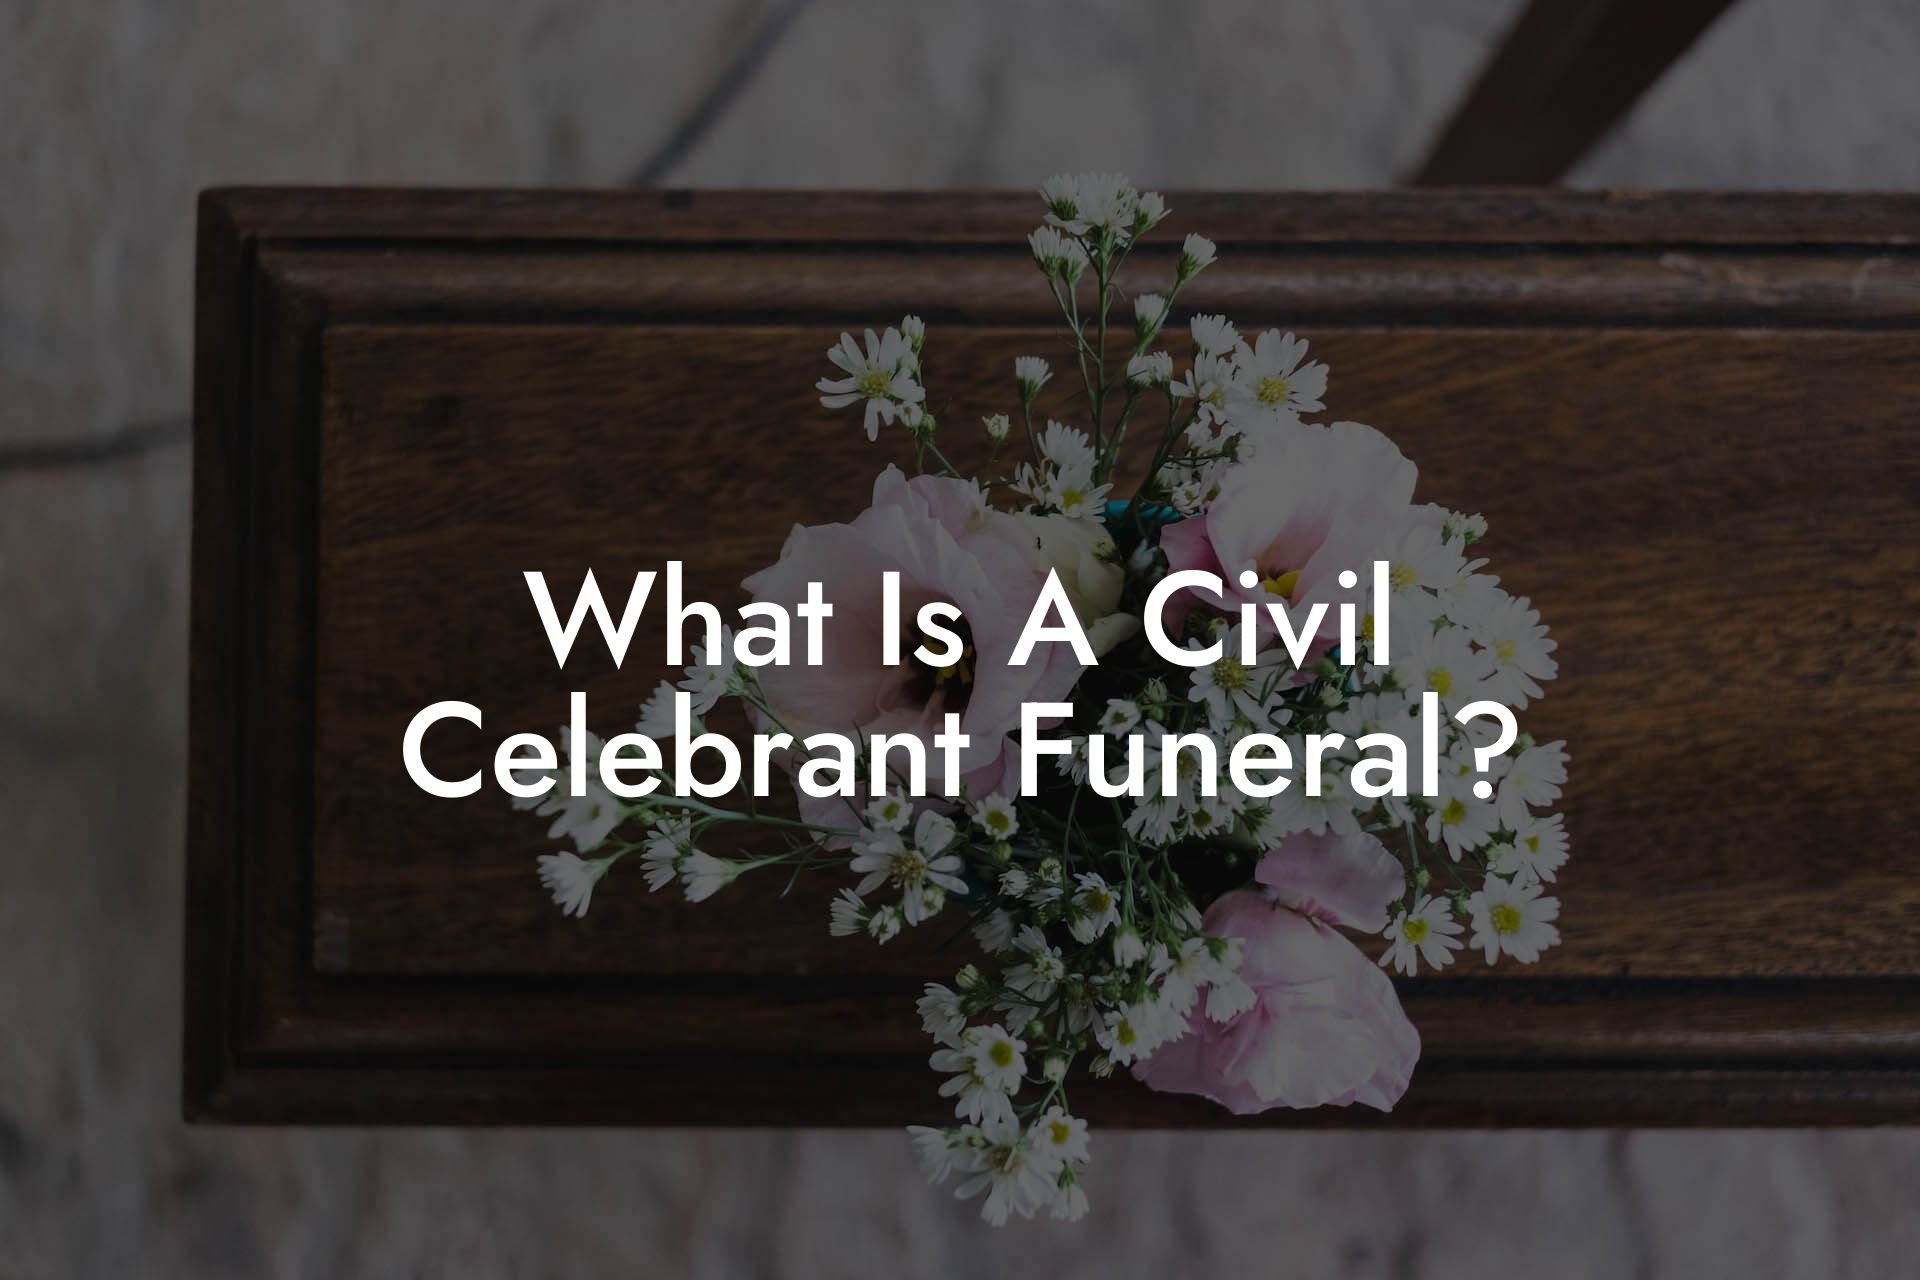 What Is A Civil Celebrant Funeral?